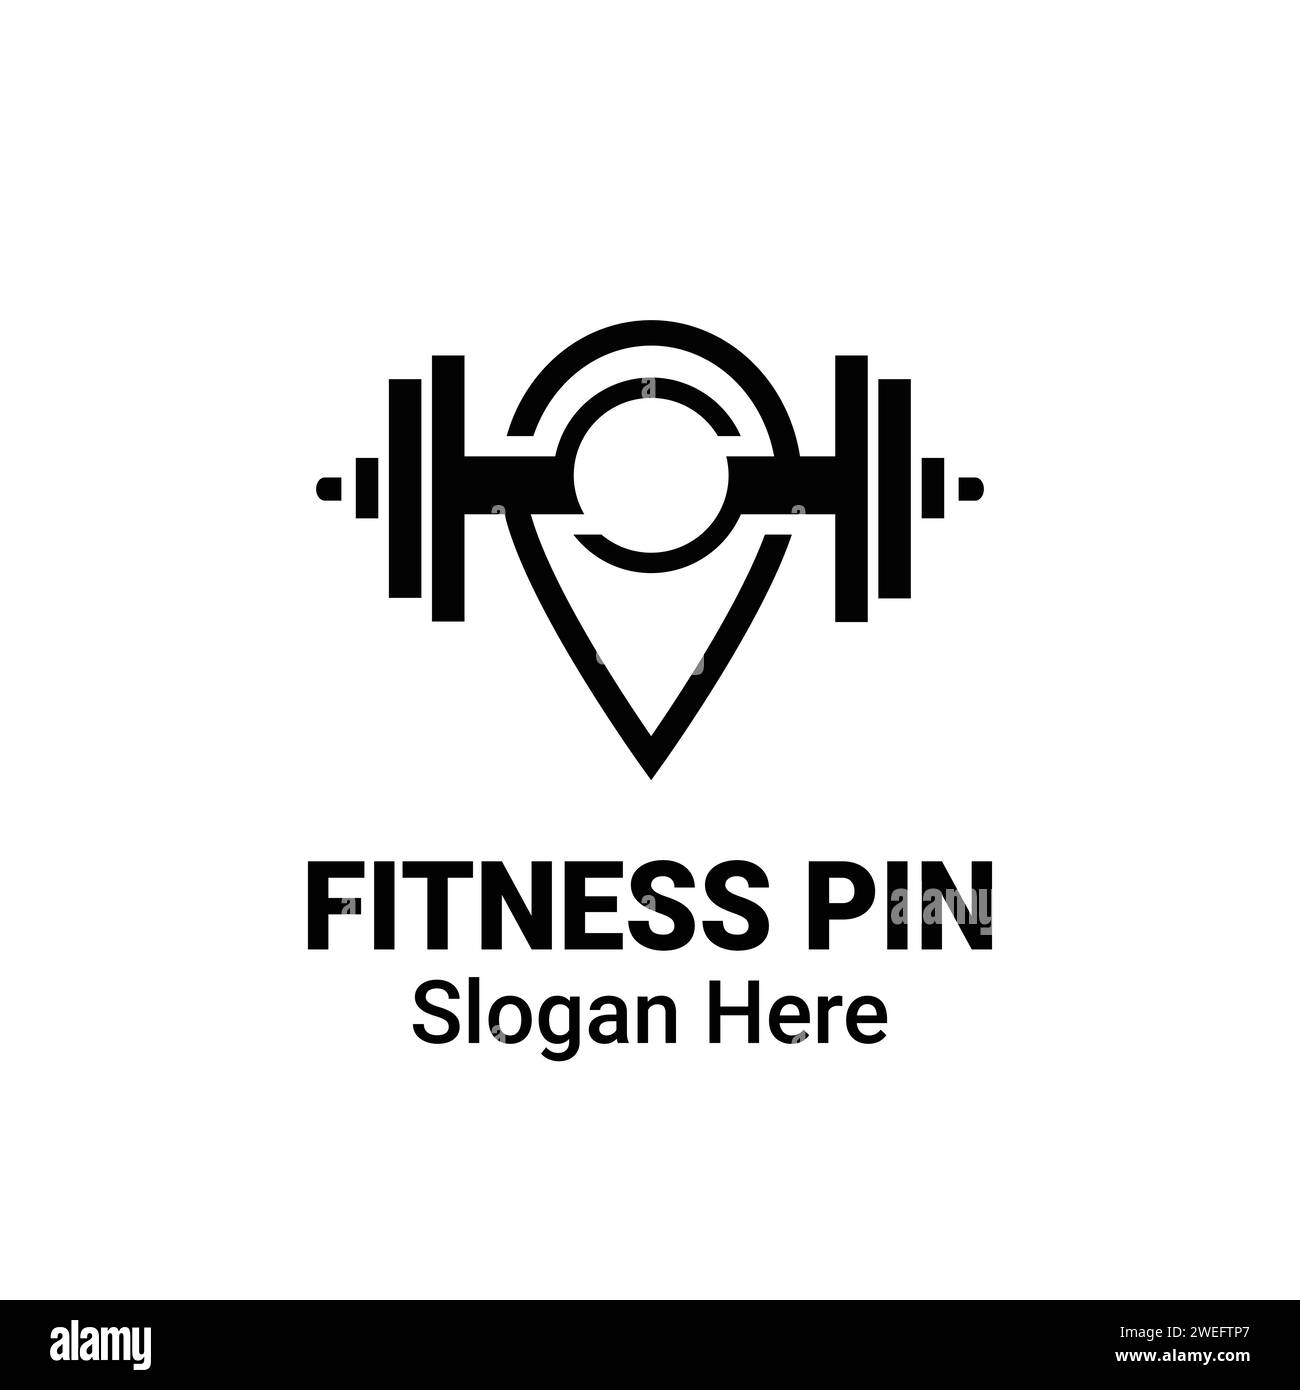 Gym zone Cut Out Stock Images & Pictures - Alamy